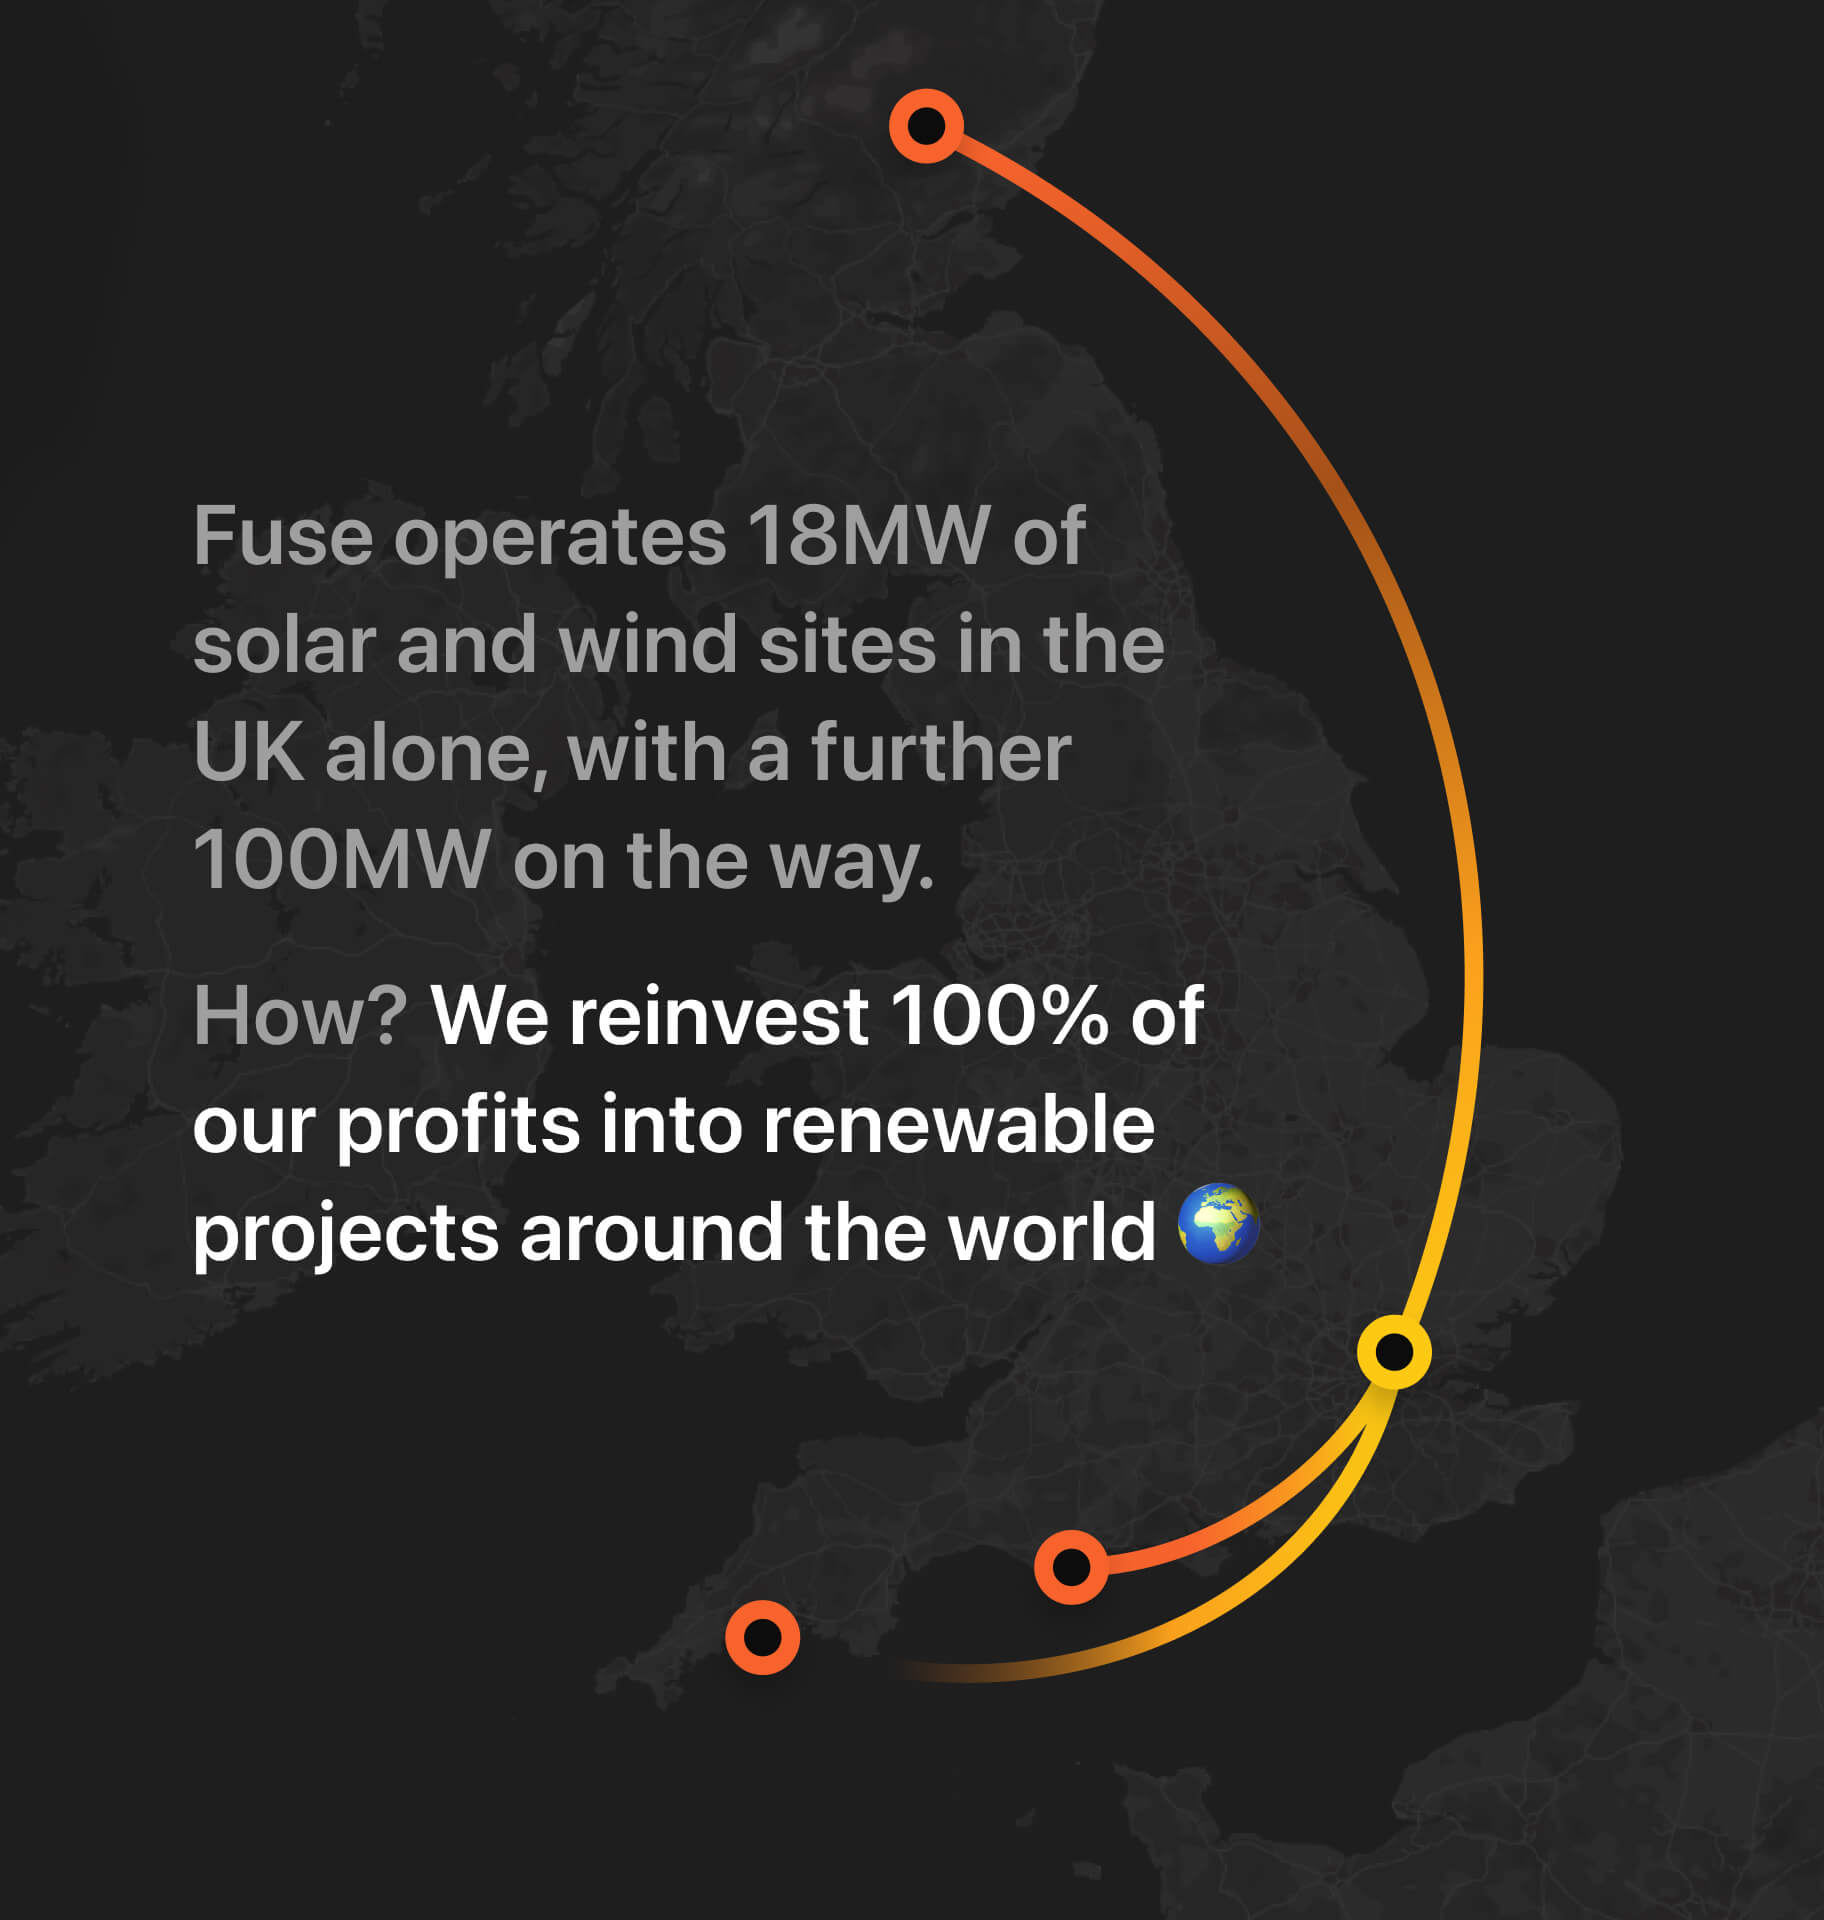 Fuse operates 18MW of solar and wind sites in the UK alone, with a further 100MW on the way. How? We reinvest 100% of our profits into renewable electricity projects around the world 🌍 